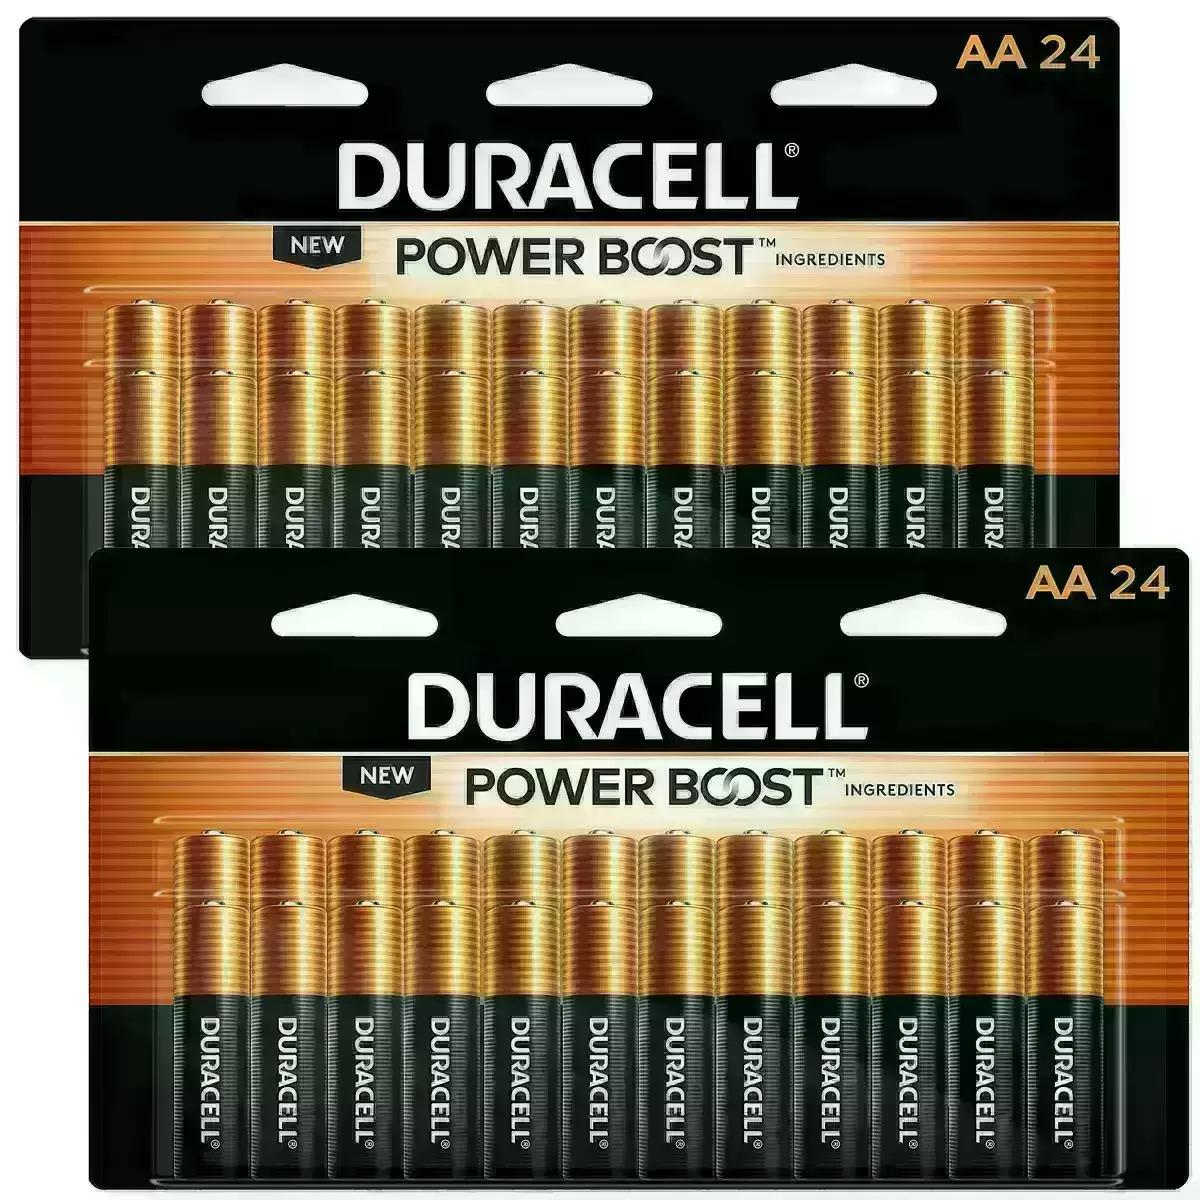 Duracell AA or AAA Alkaline Batteries 48 Pack for Free After Reward Points